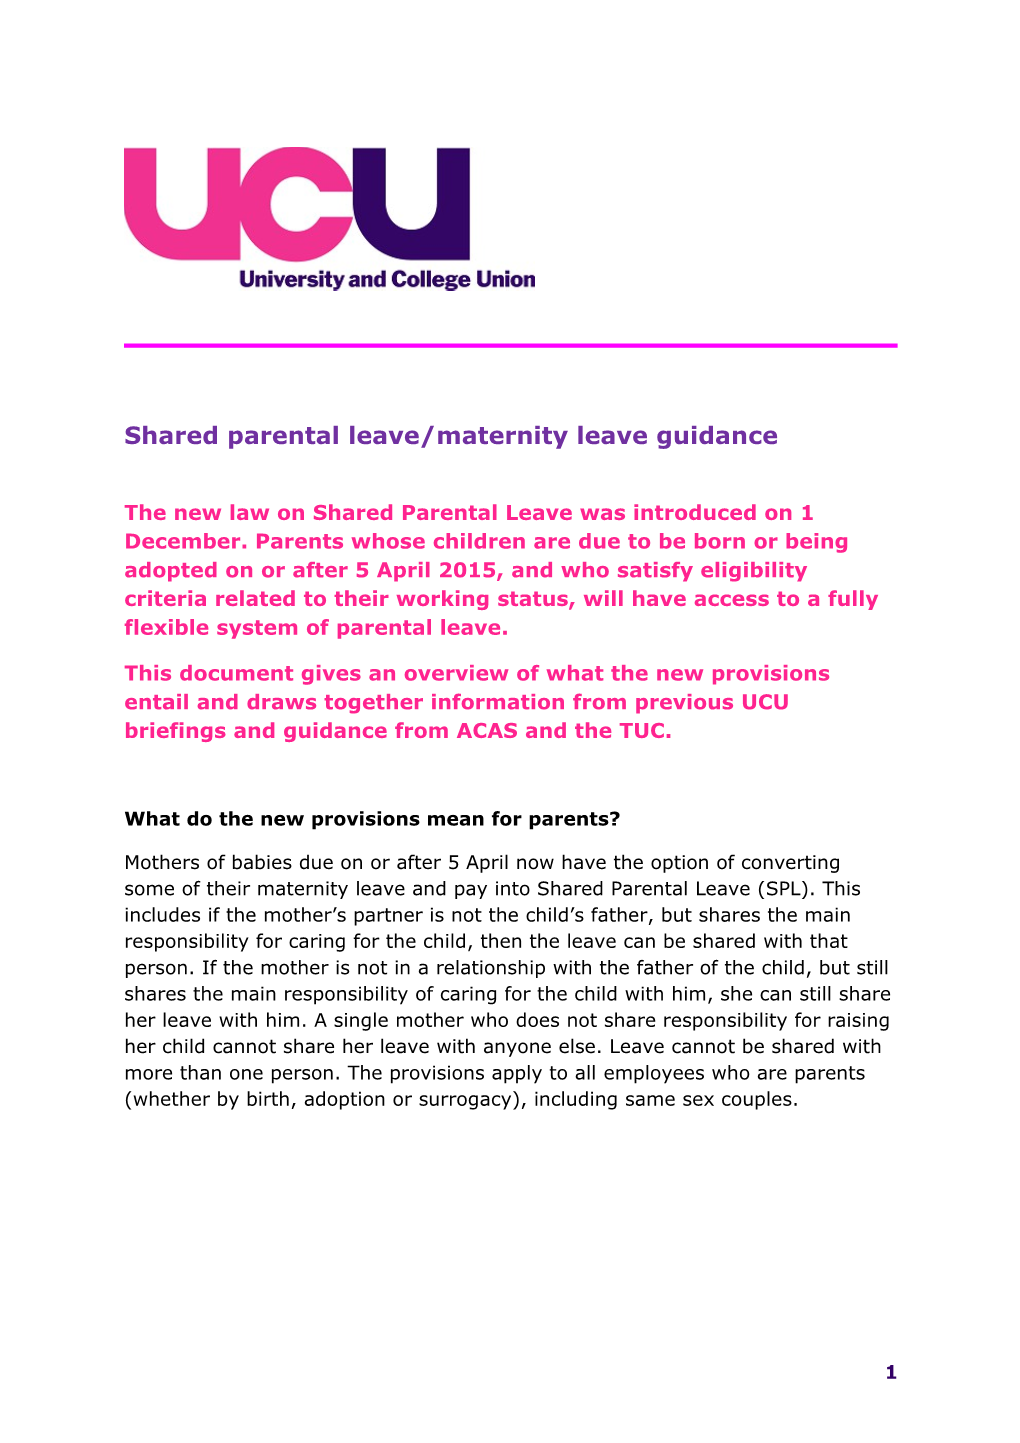 Shared Parental Leave/Maternity Leave Guidance